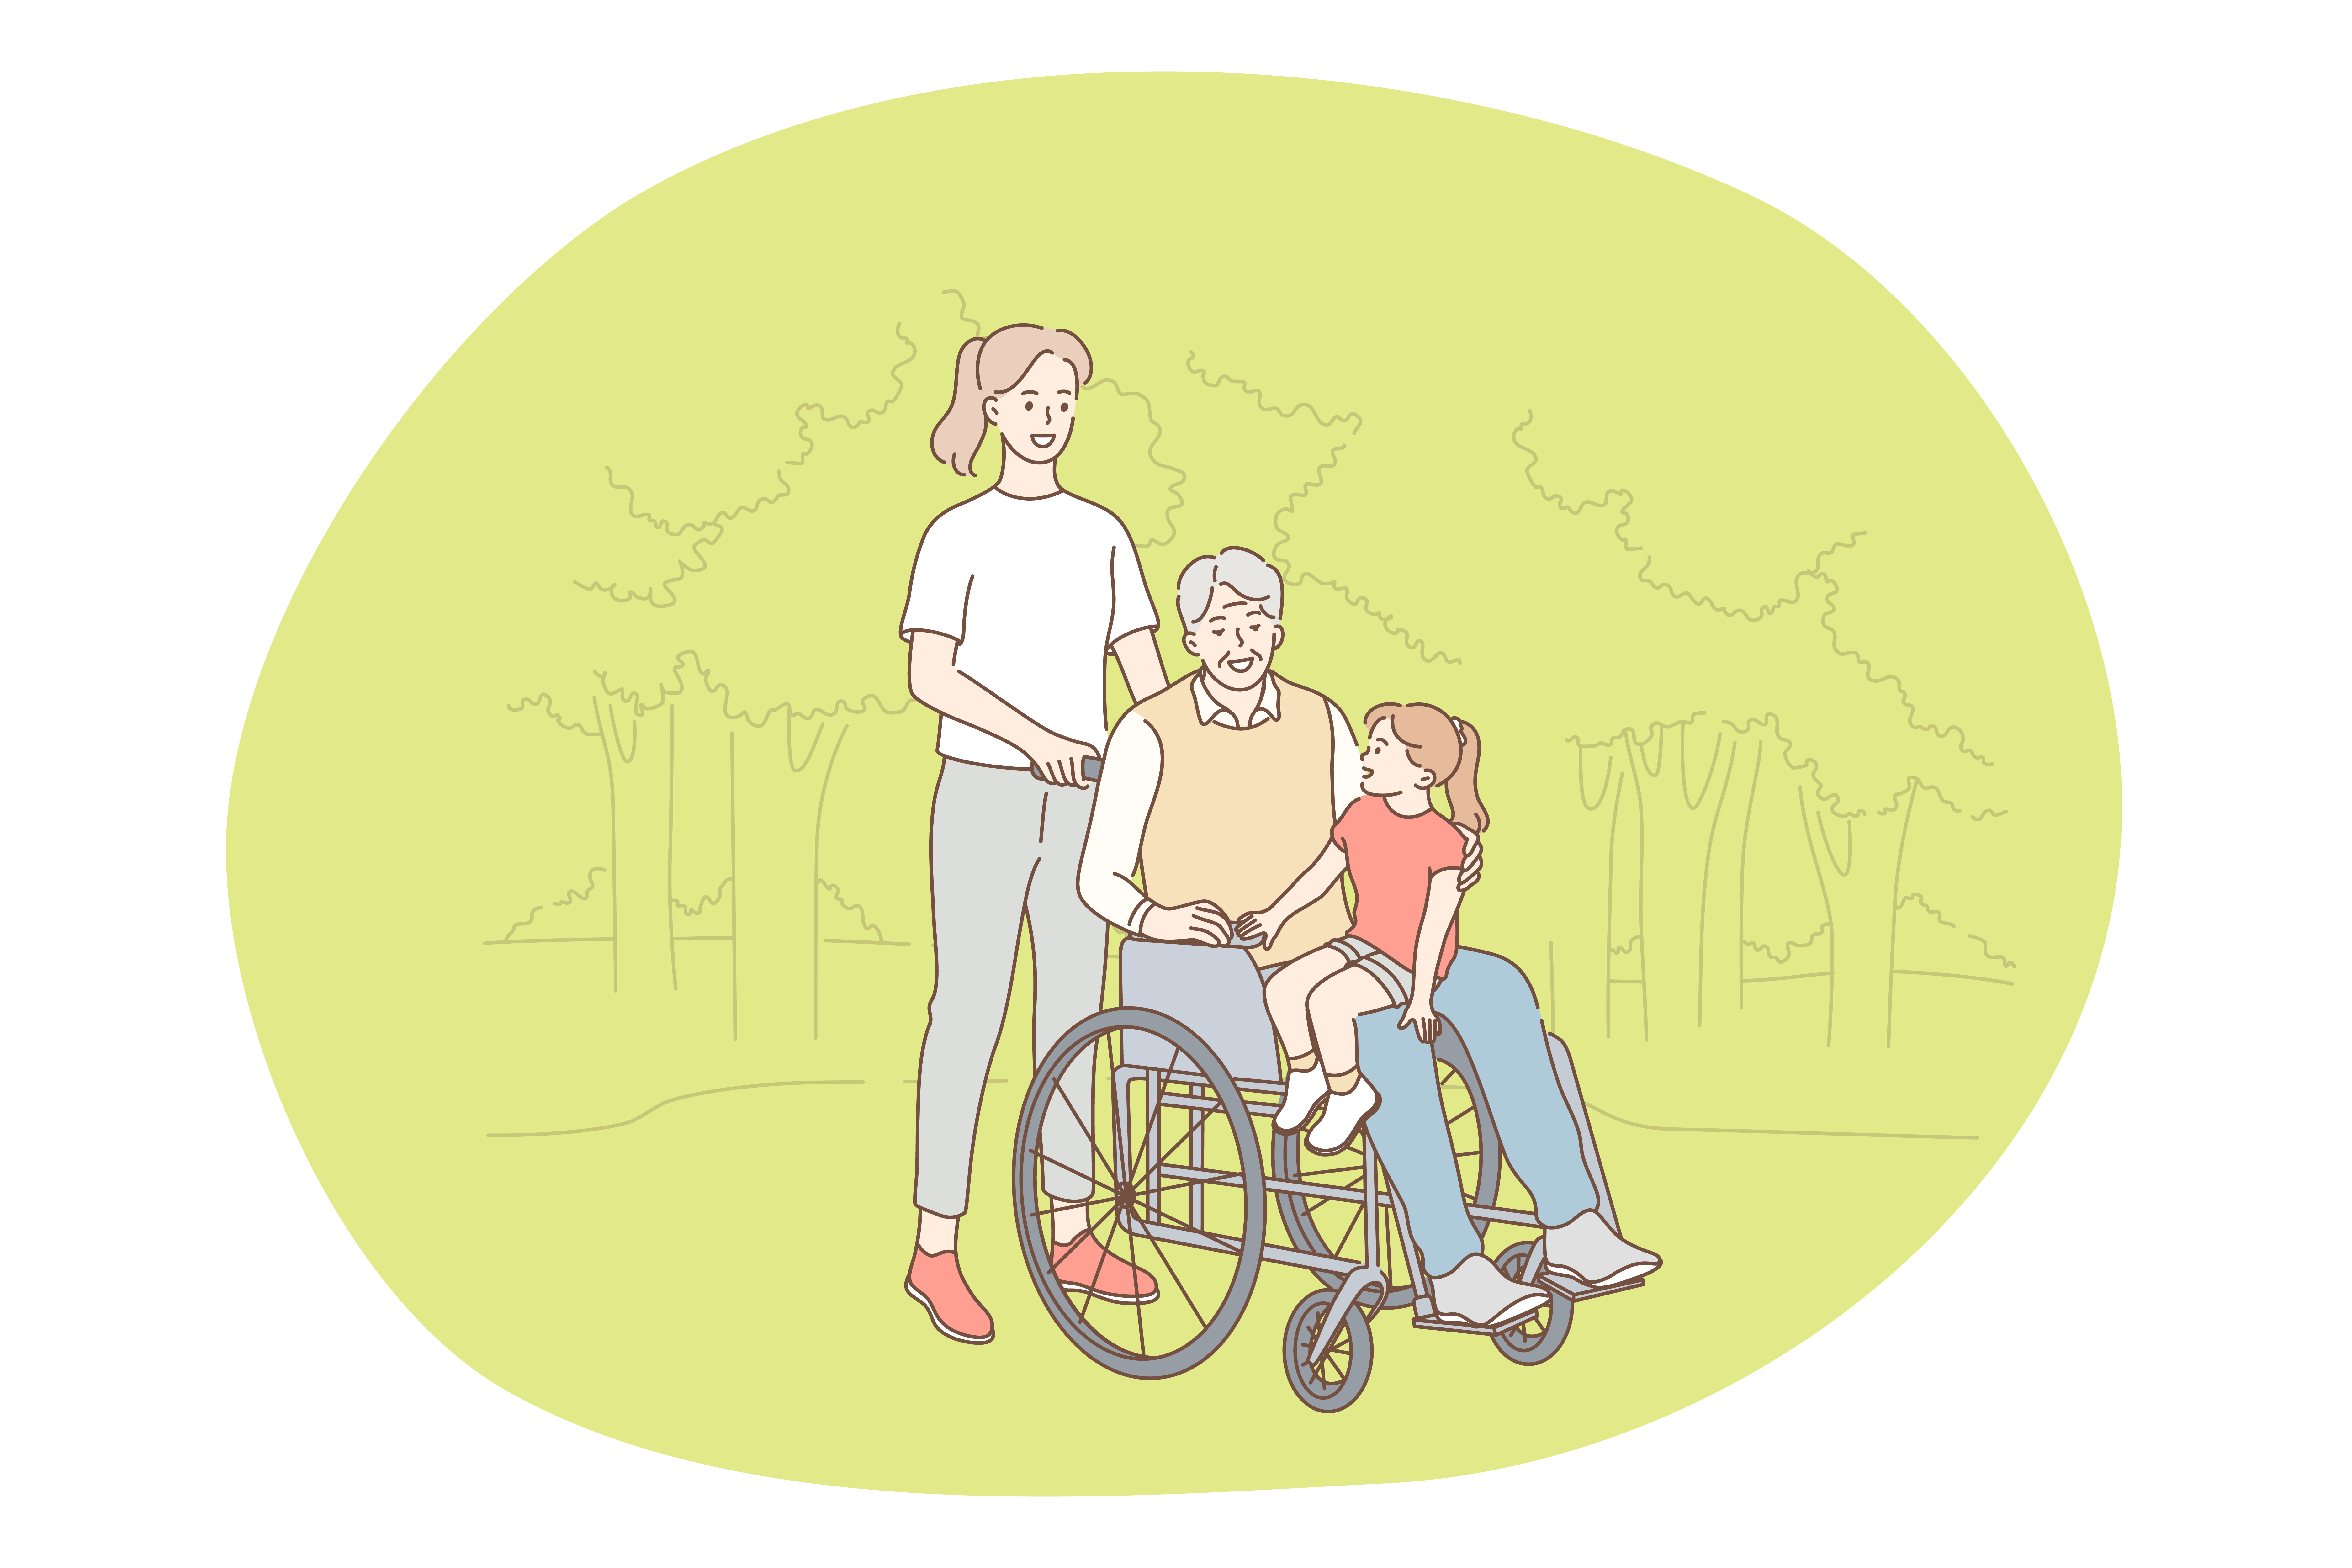 Disabled people on wheelchair living happy active lifestyle concept. Senior elderly man on wheelchair enjoying company of daughter and granddaughter on knees in park outdoors in summer illustration . Disabled people on wheelchair living happy active lifestyle concept